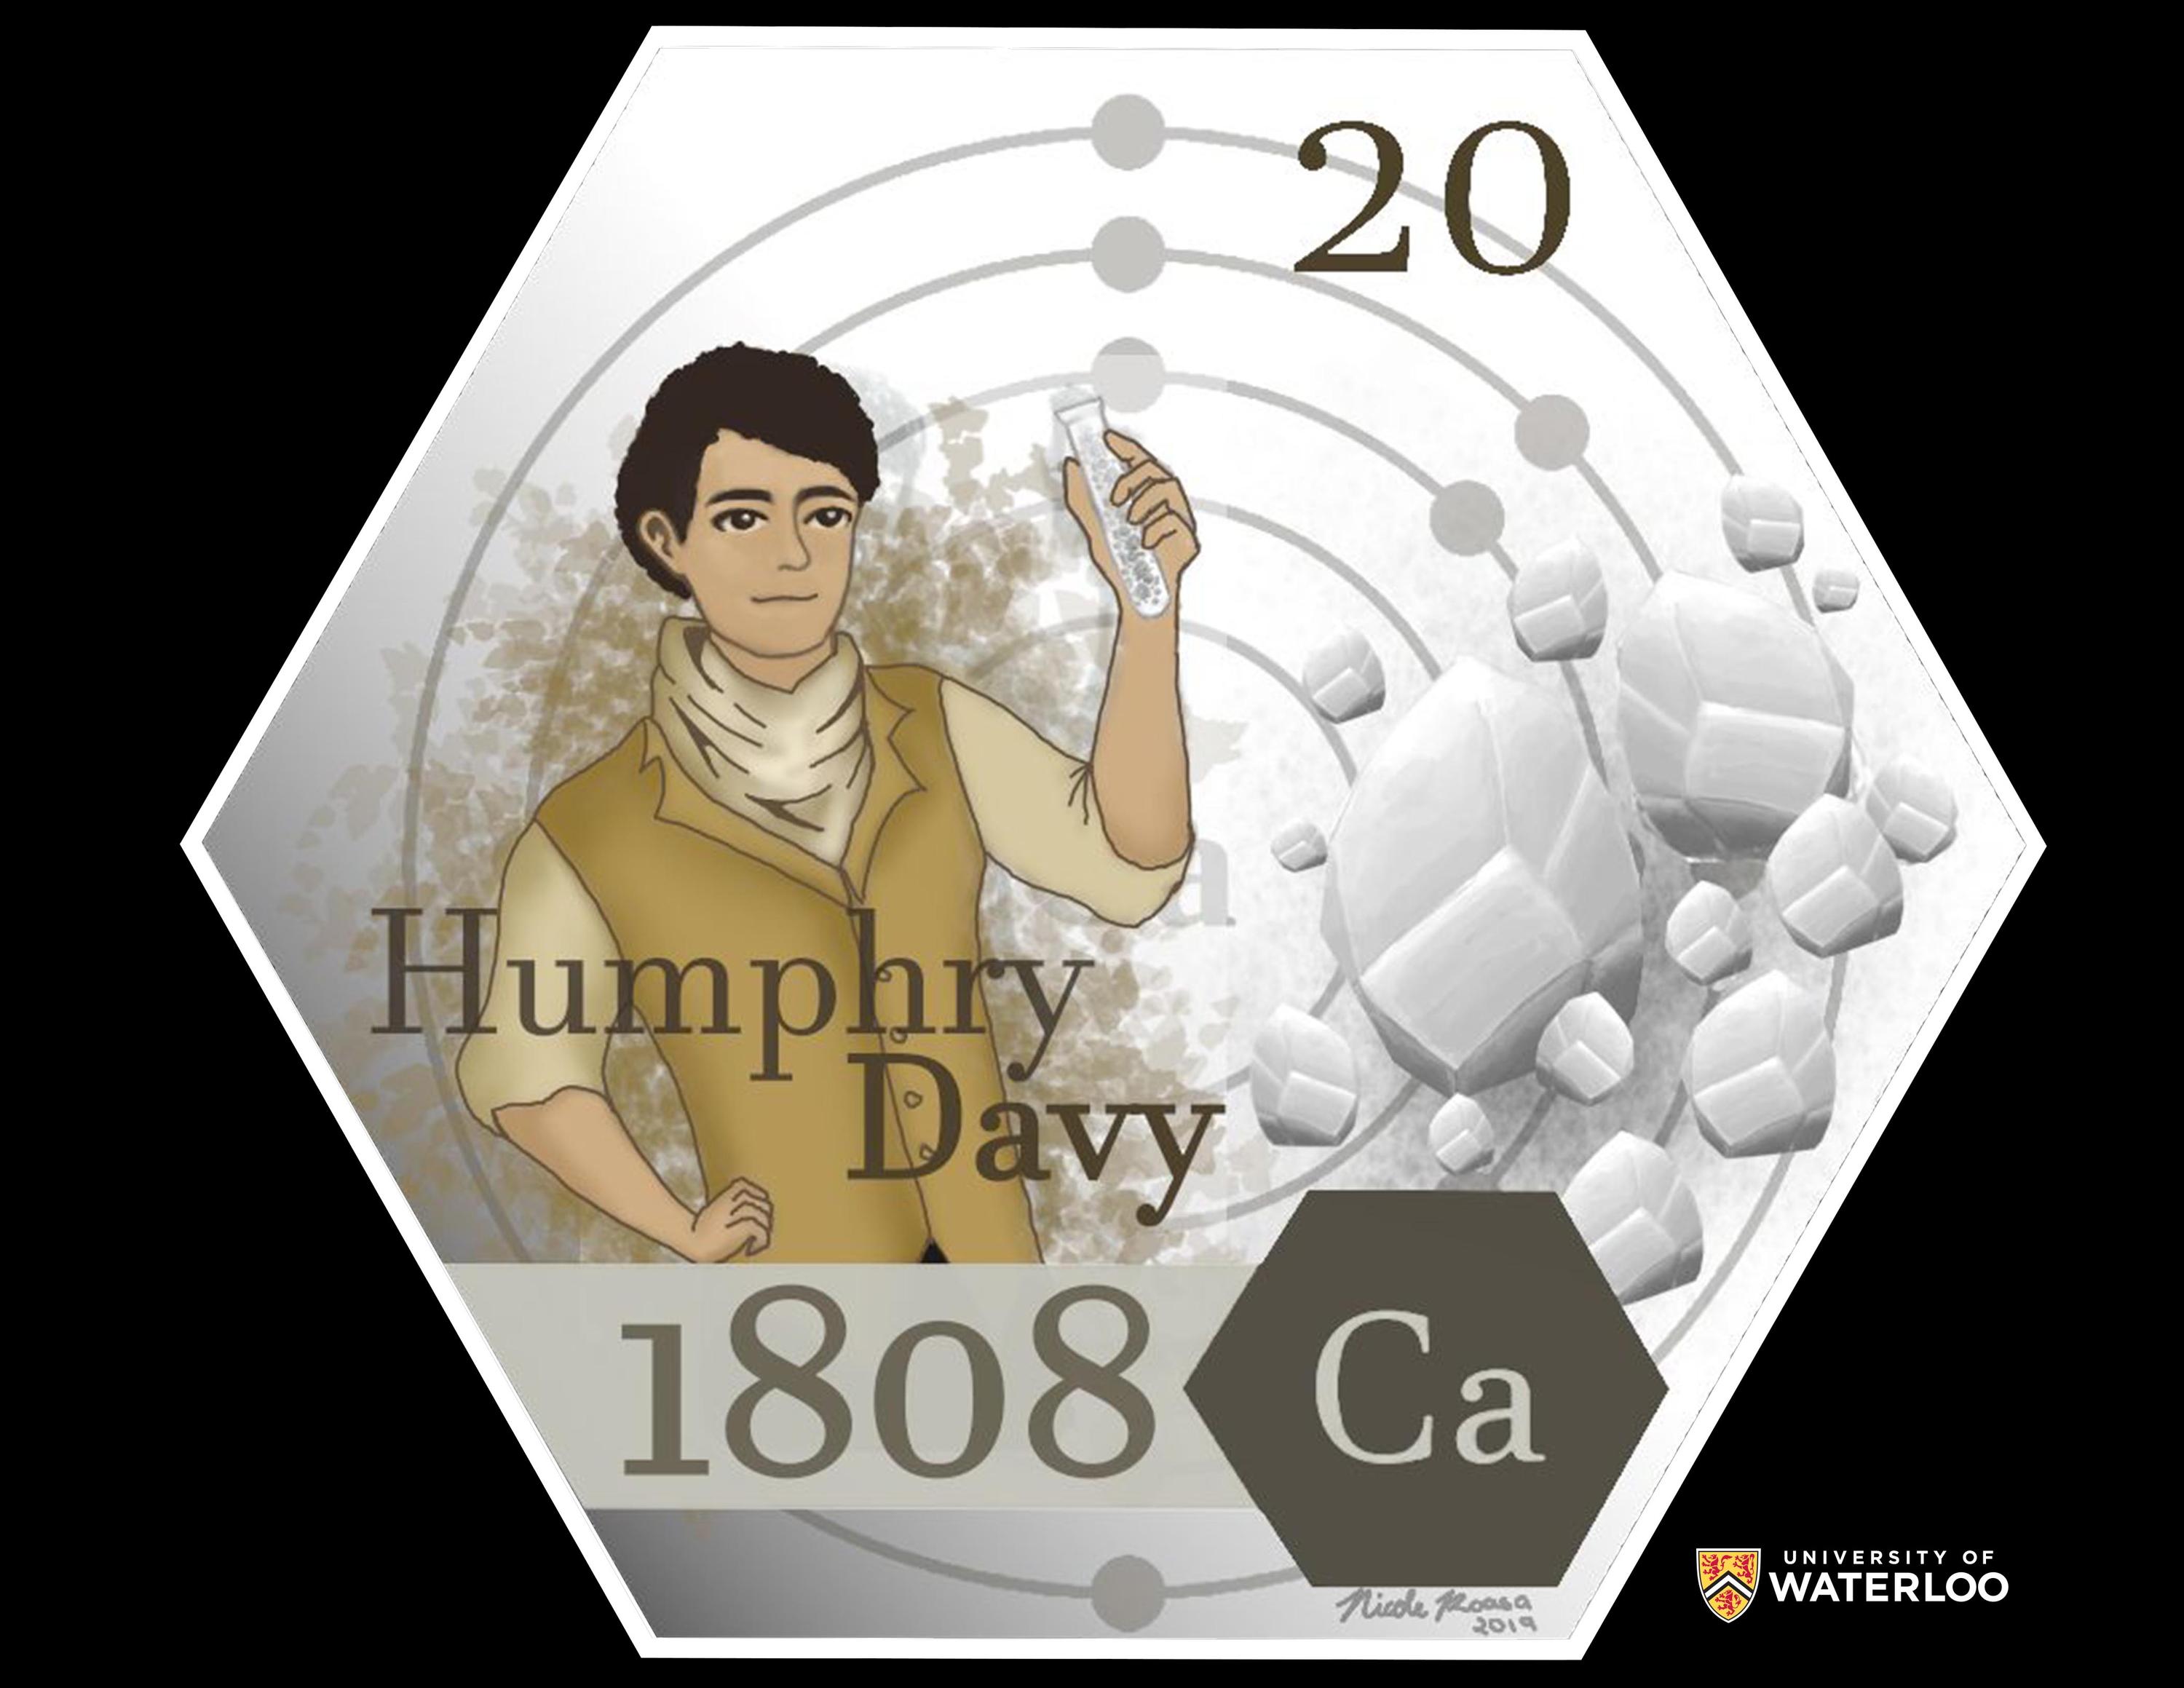 Digital composite featuring Sir Humphrey Davy holding a test tube. Chemical symbol “Ca”, plus the atomic number “20” and “1808”. Background features an atomic Bohr model and crystals.